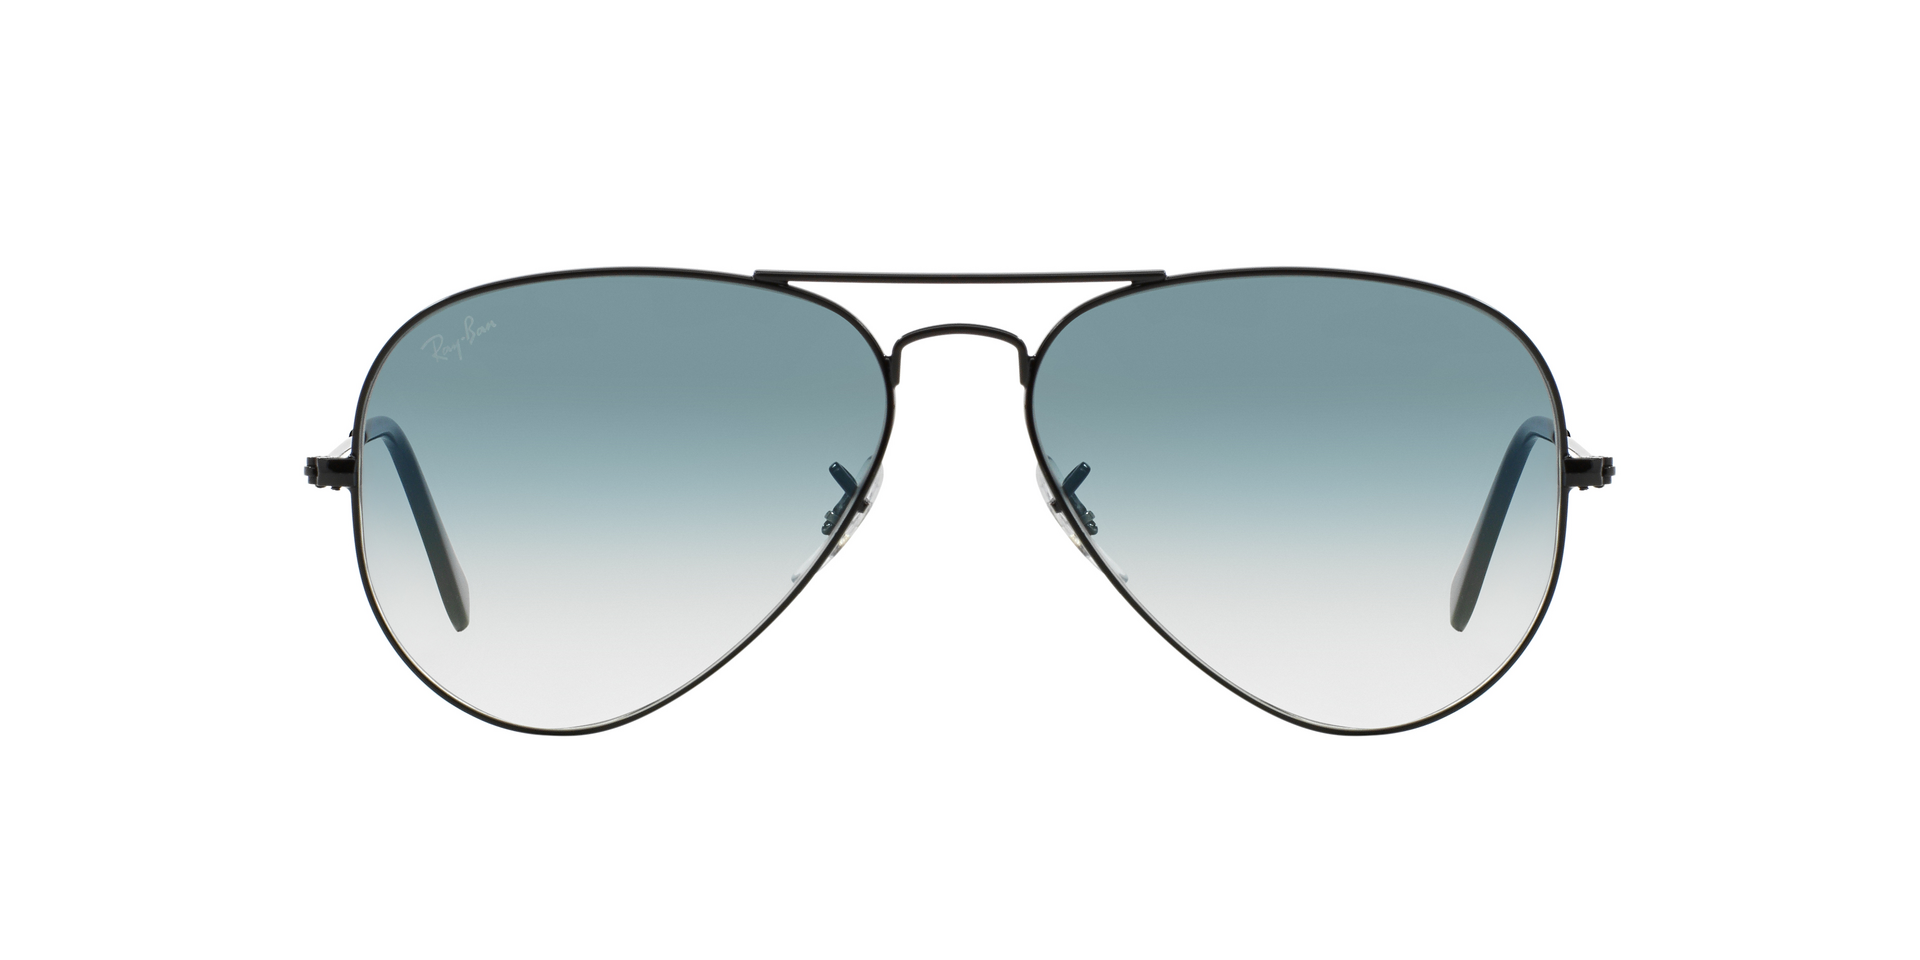 AVIATOR GRADIENT Sunglasses in Gold and Blue - RB3025 | Ray-Ban®